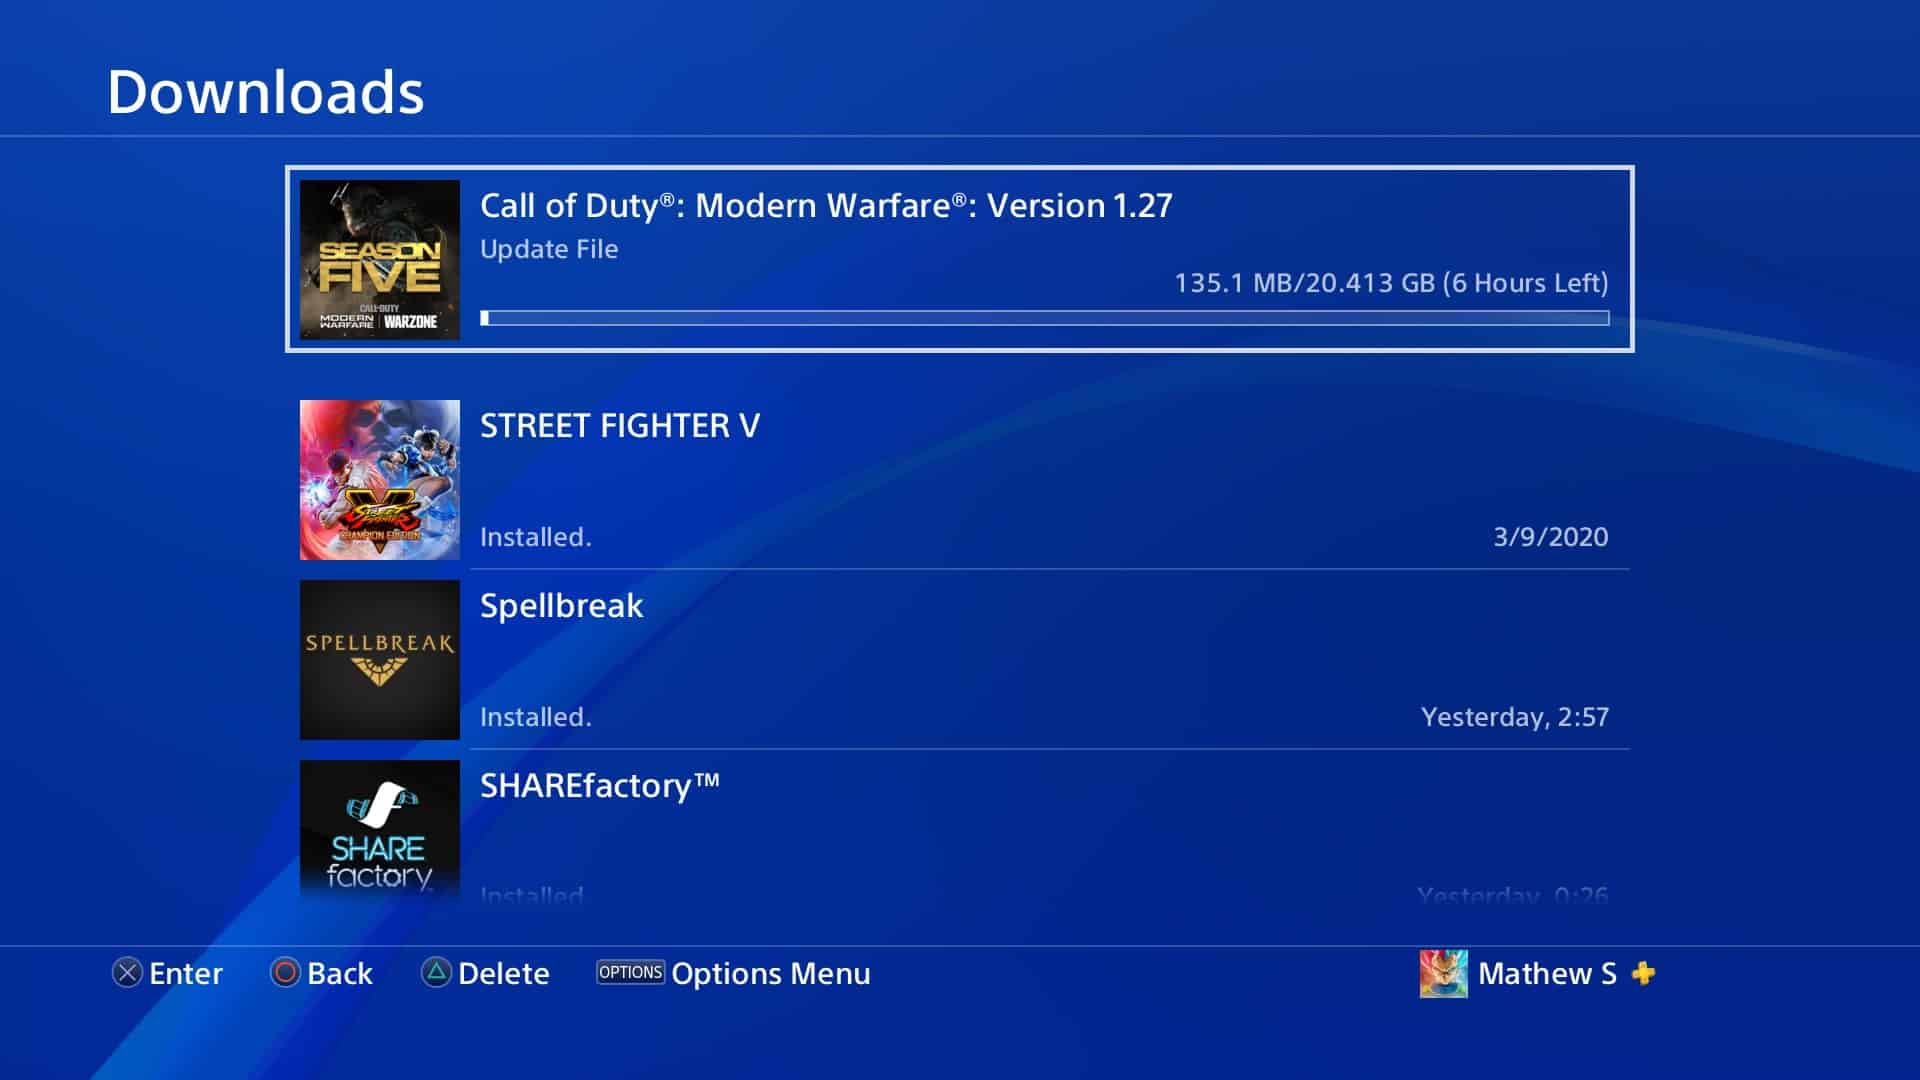 How to preload Call of Duty Modern Warfare early on PS4, Xbox One